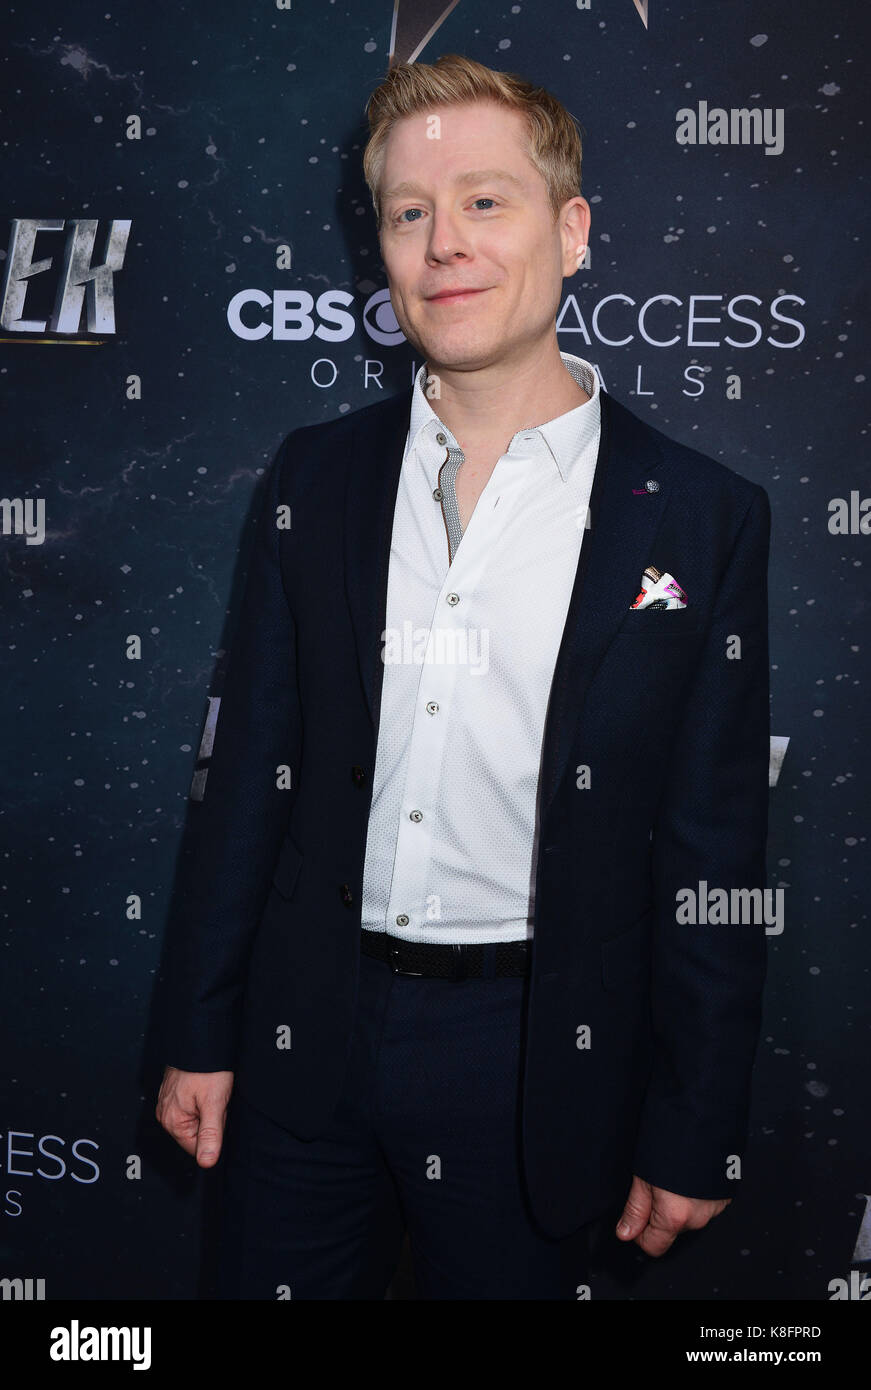 Los Angeles, USA. 19th Sep, 2017. Anthony Rapp arriving at the Star Trek Discovery Premiere at the ArcLight Theatre in Los Angeles. September 19, 2017 Credit: Tsuni / USA/Alamy Live News Stock Photo